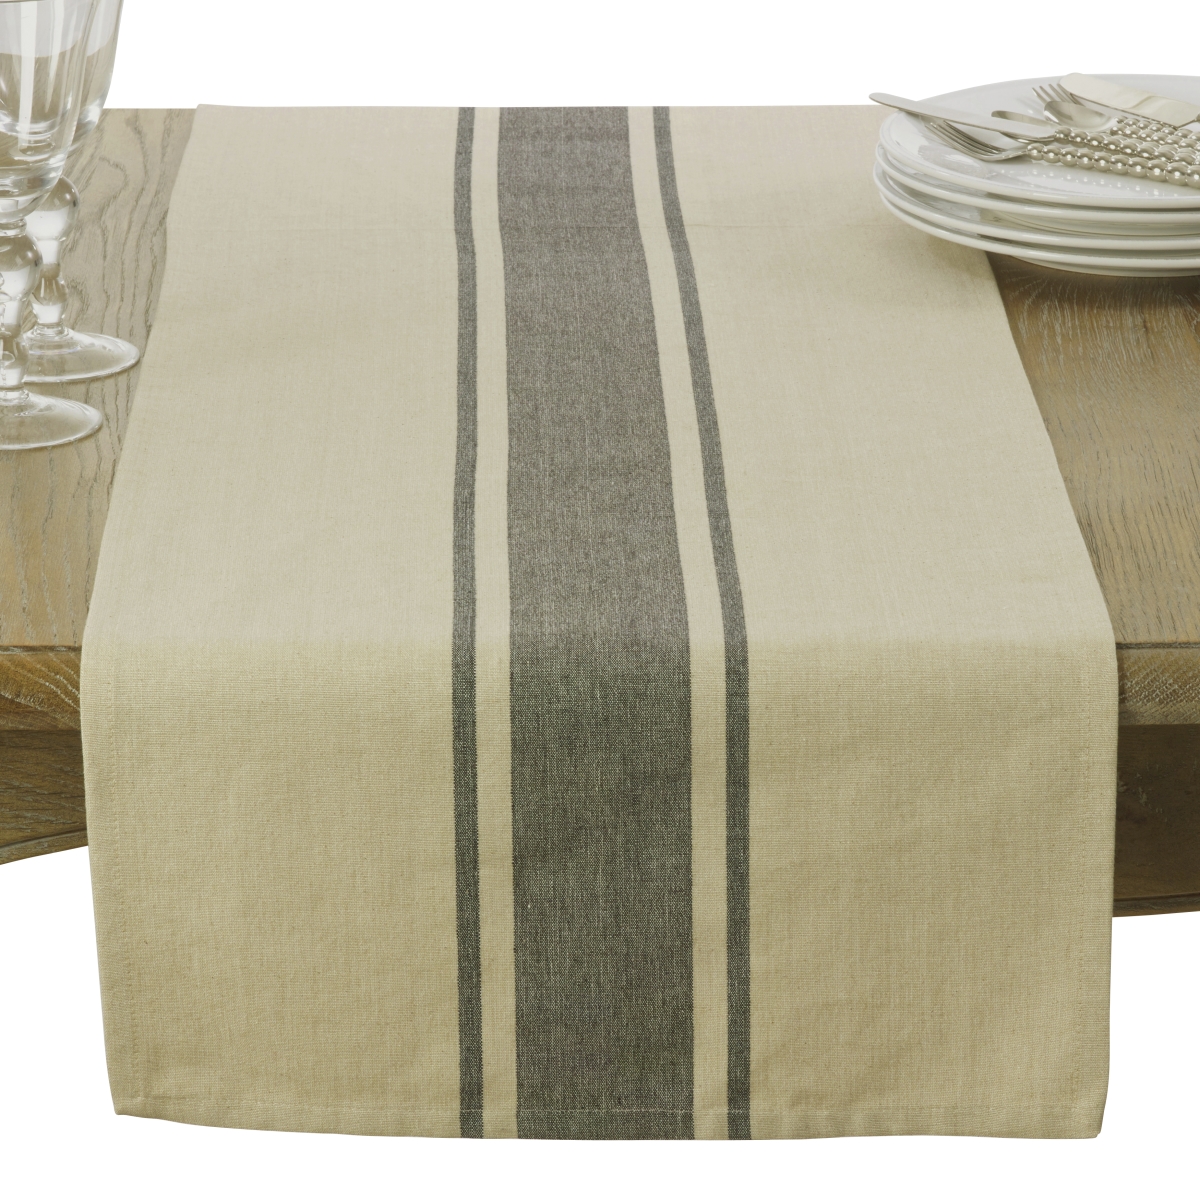 Picture of Saro Lifestyle 3011.N16108B 16 x 108 in. Cotton Table Runner with Banded Design, Natural